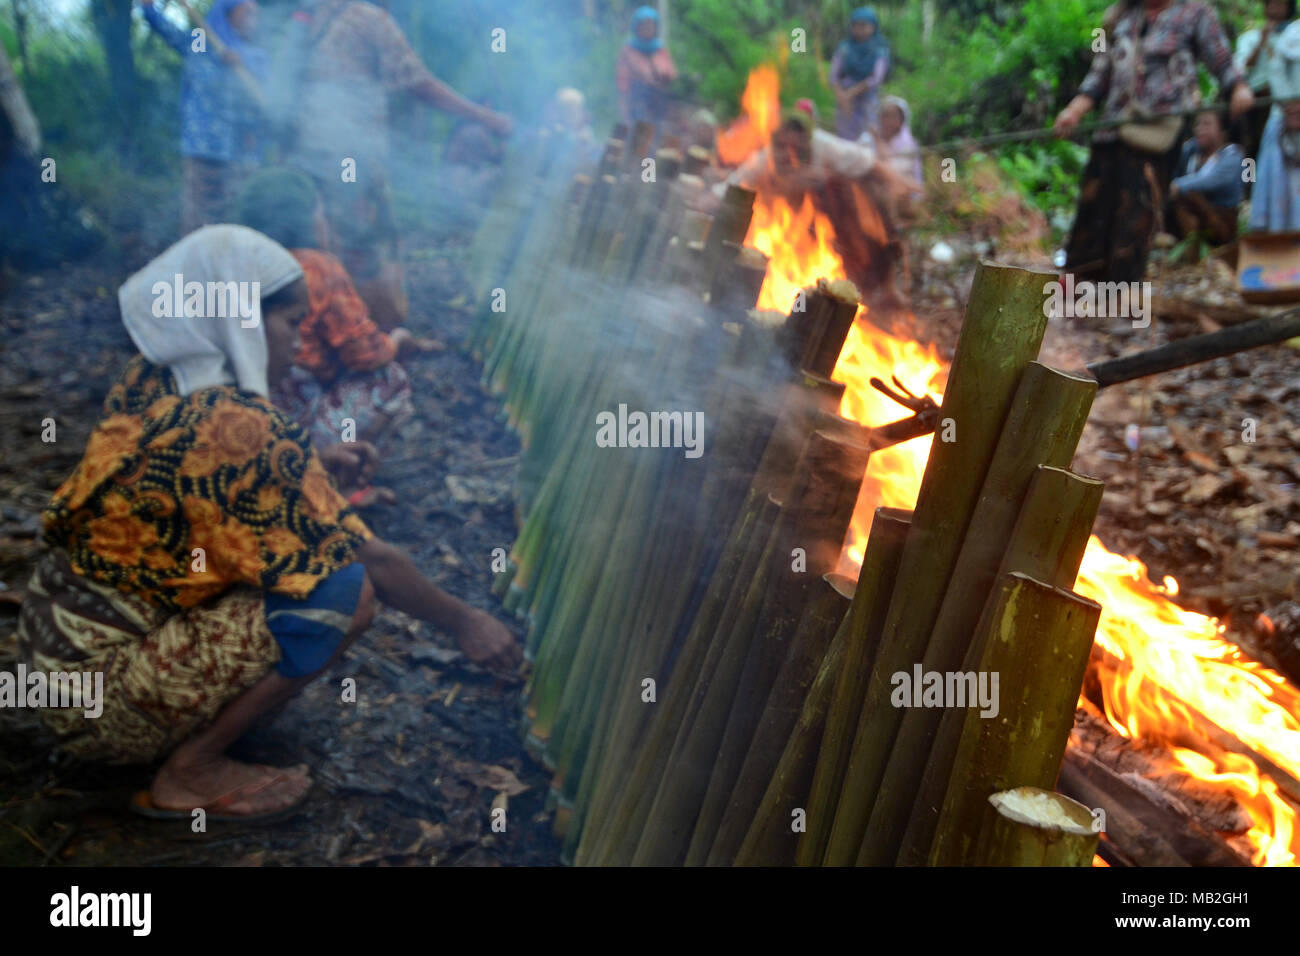 Meratus Dayak women make traditional food from sticky rice and cooked with bamboo then burned, the food is called Lamang. Traditional food from borneo. Stock Photo